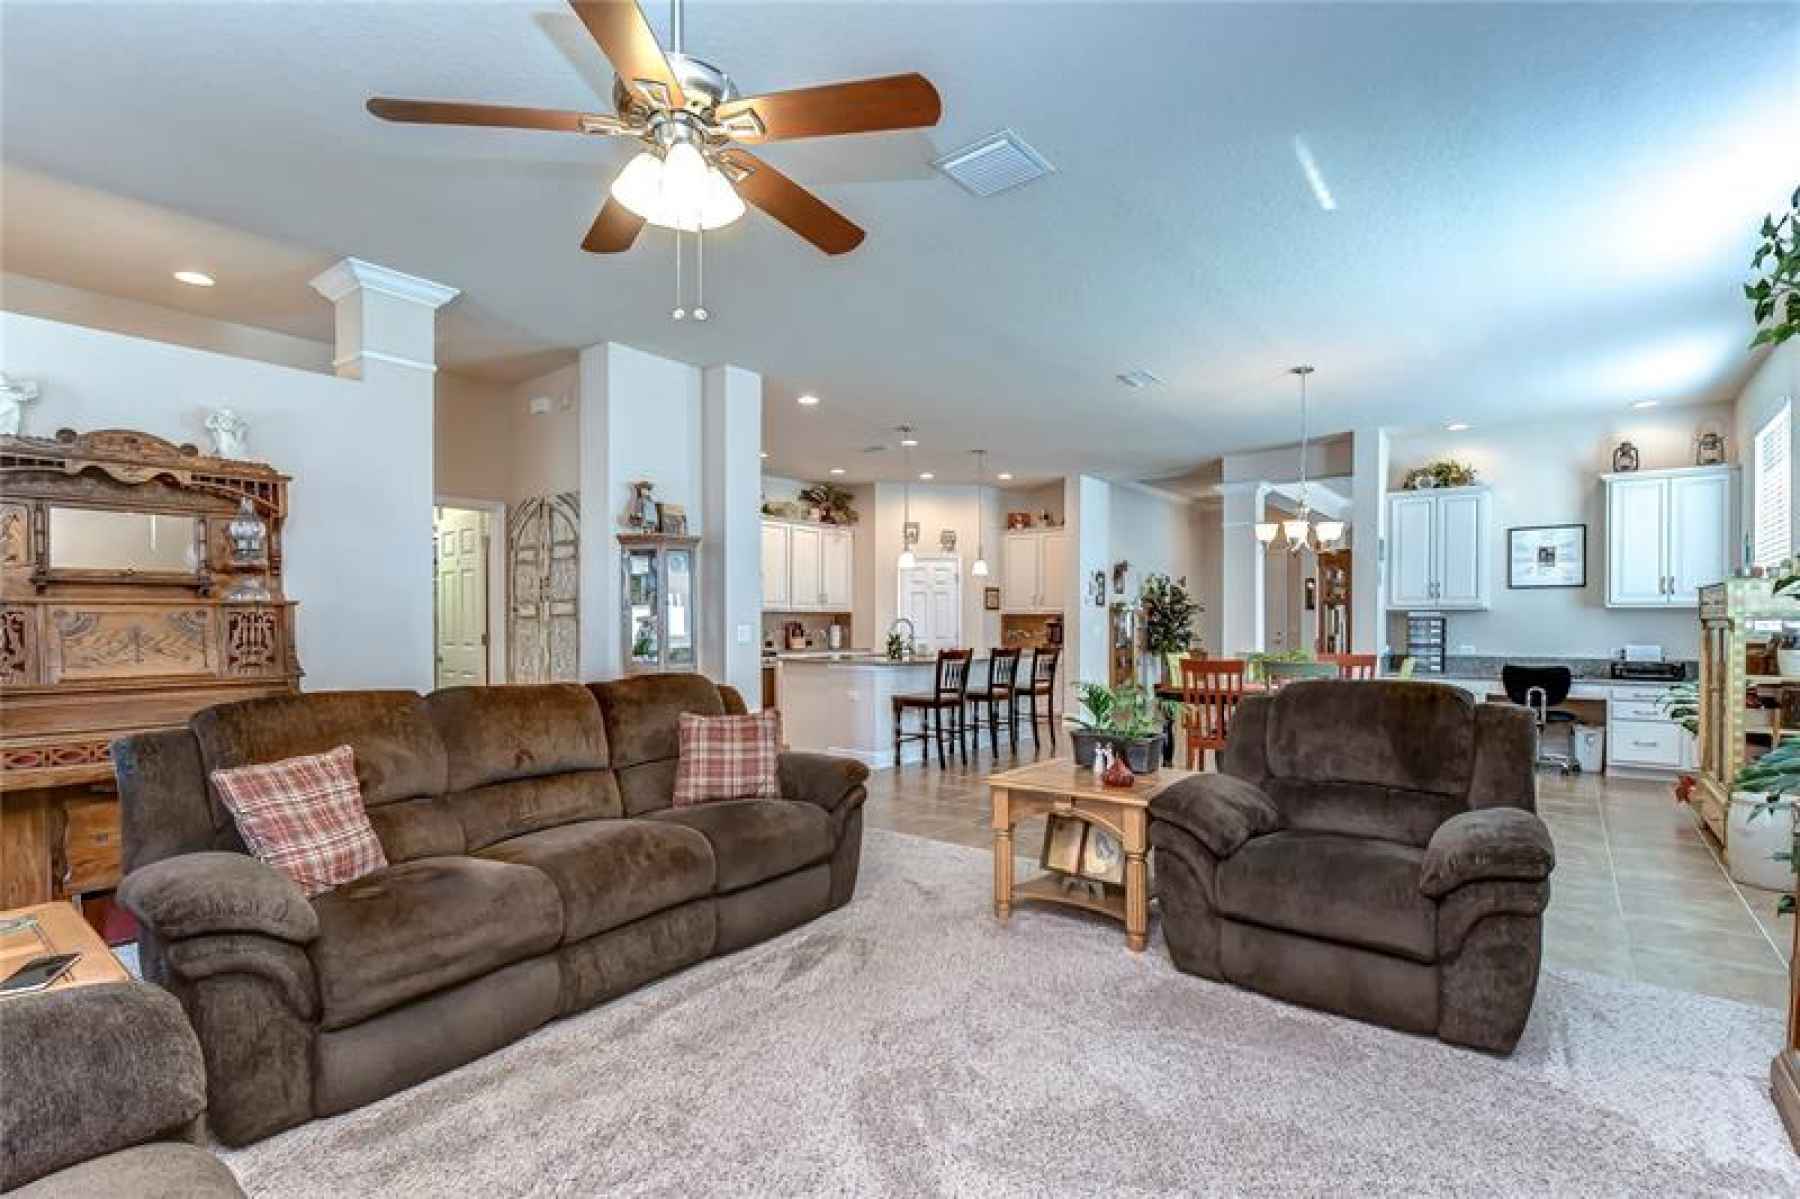 Kick back and relax in this family room!